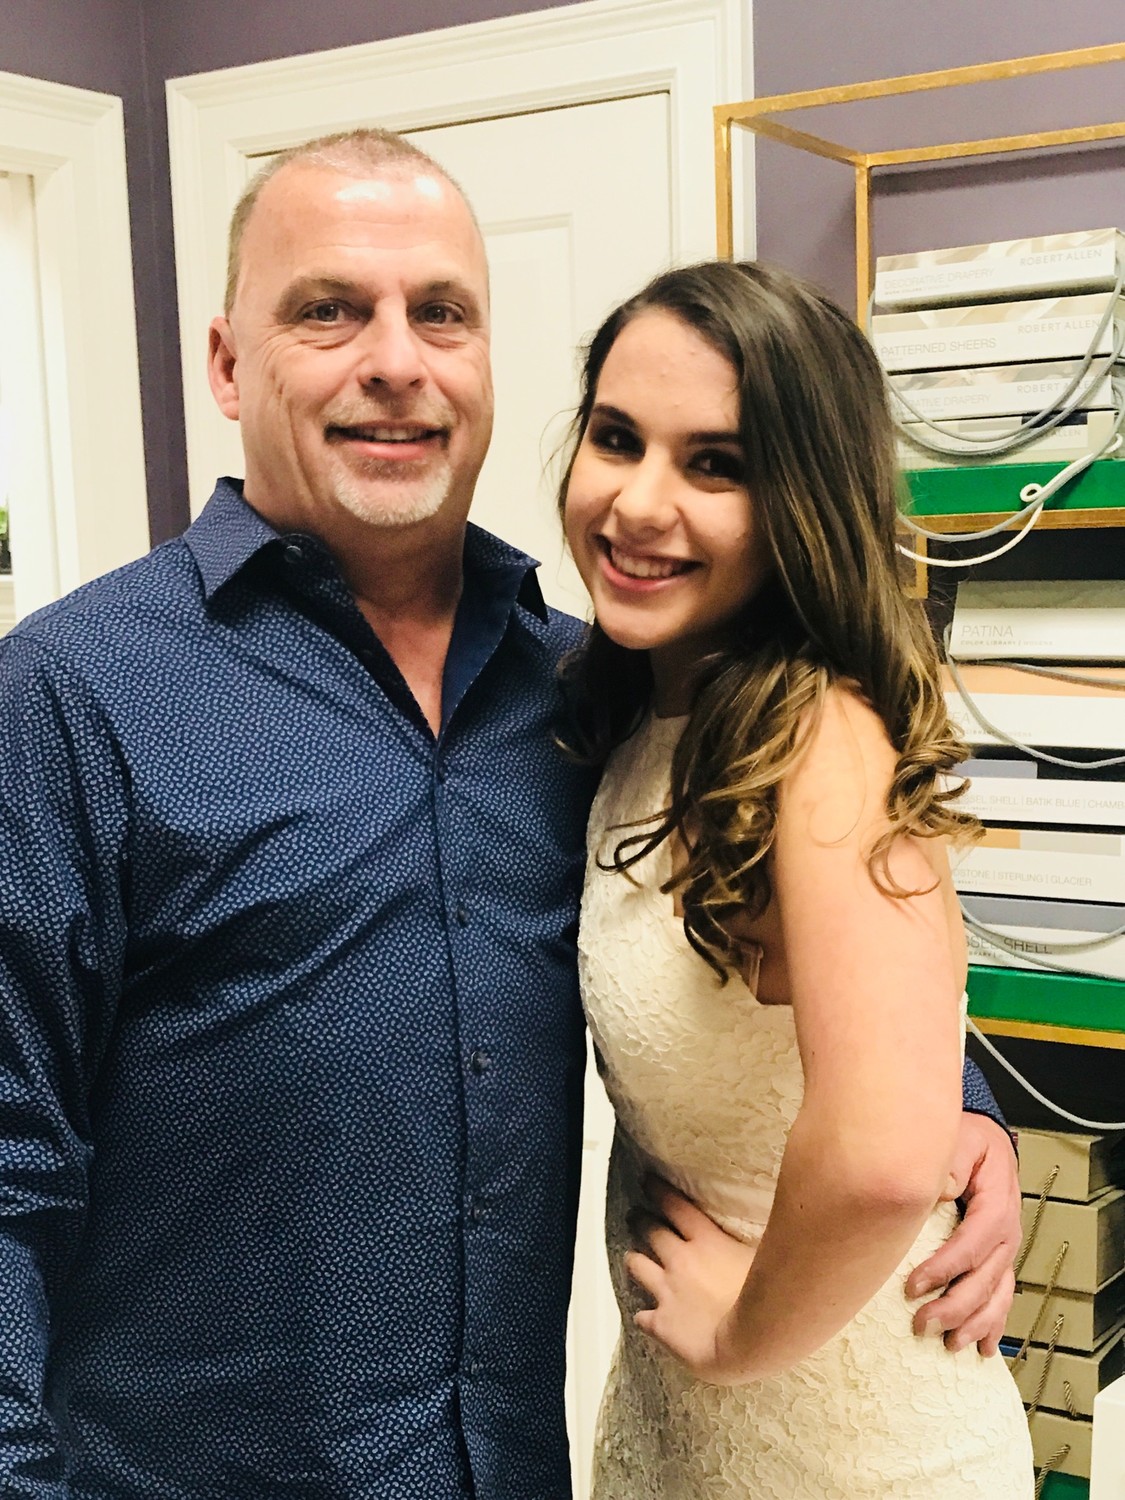 Mitchell Kraeling sr. and his daughter, Kimberley, organize annual fundraising gala events in memory of Mitchell jr., who died of a rare pediatric bone cancer.